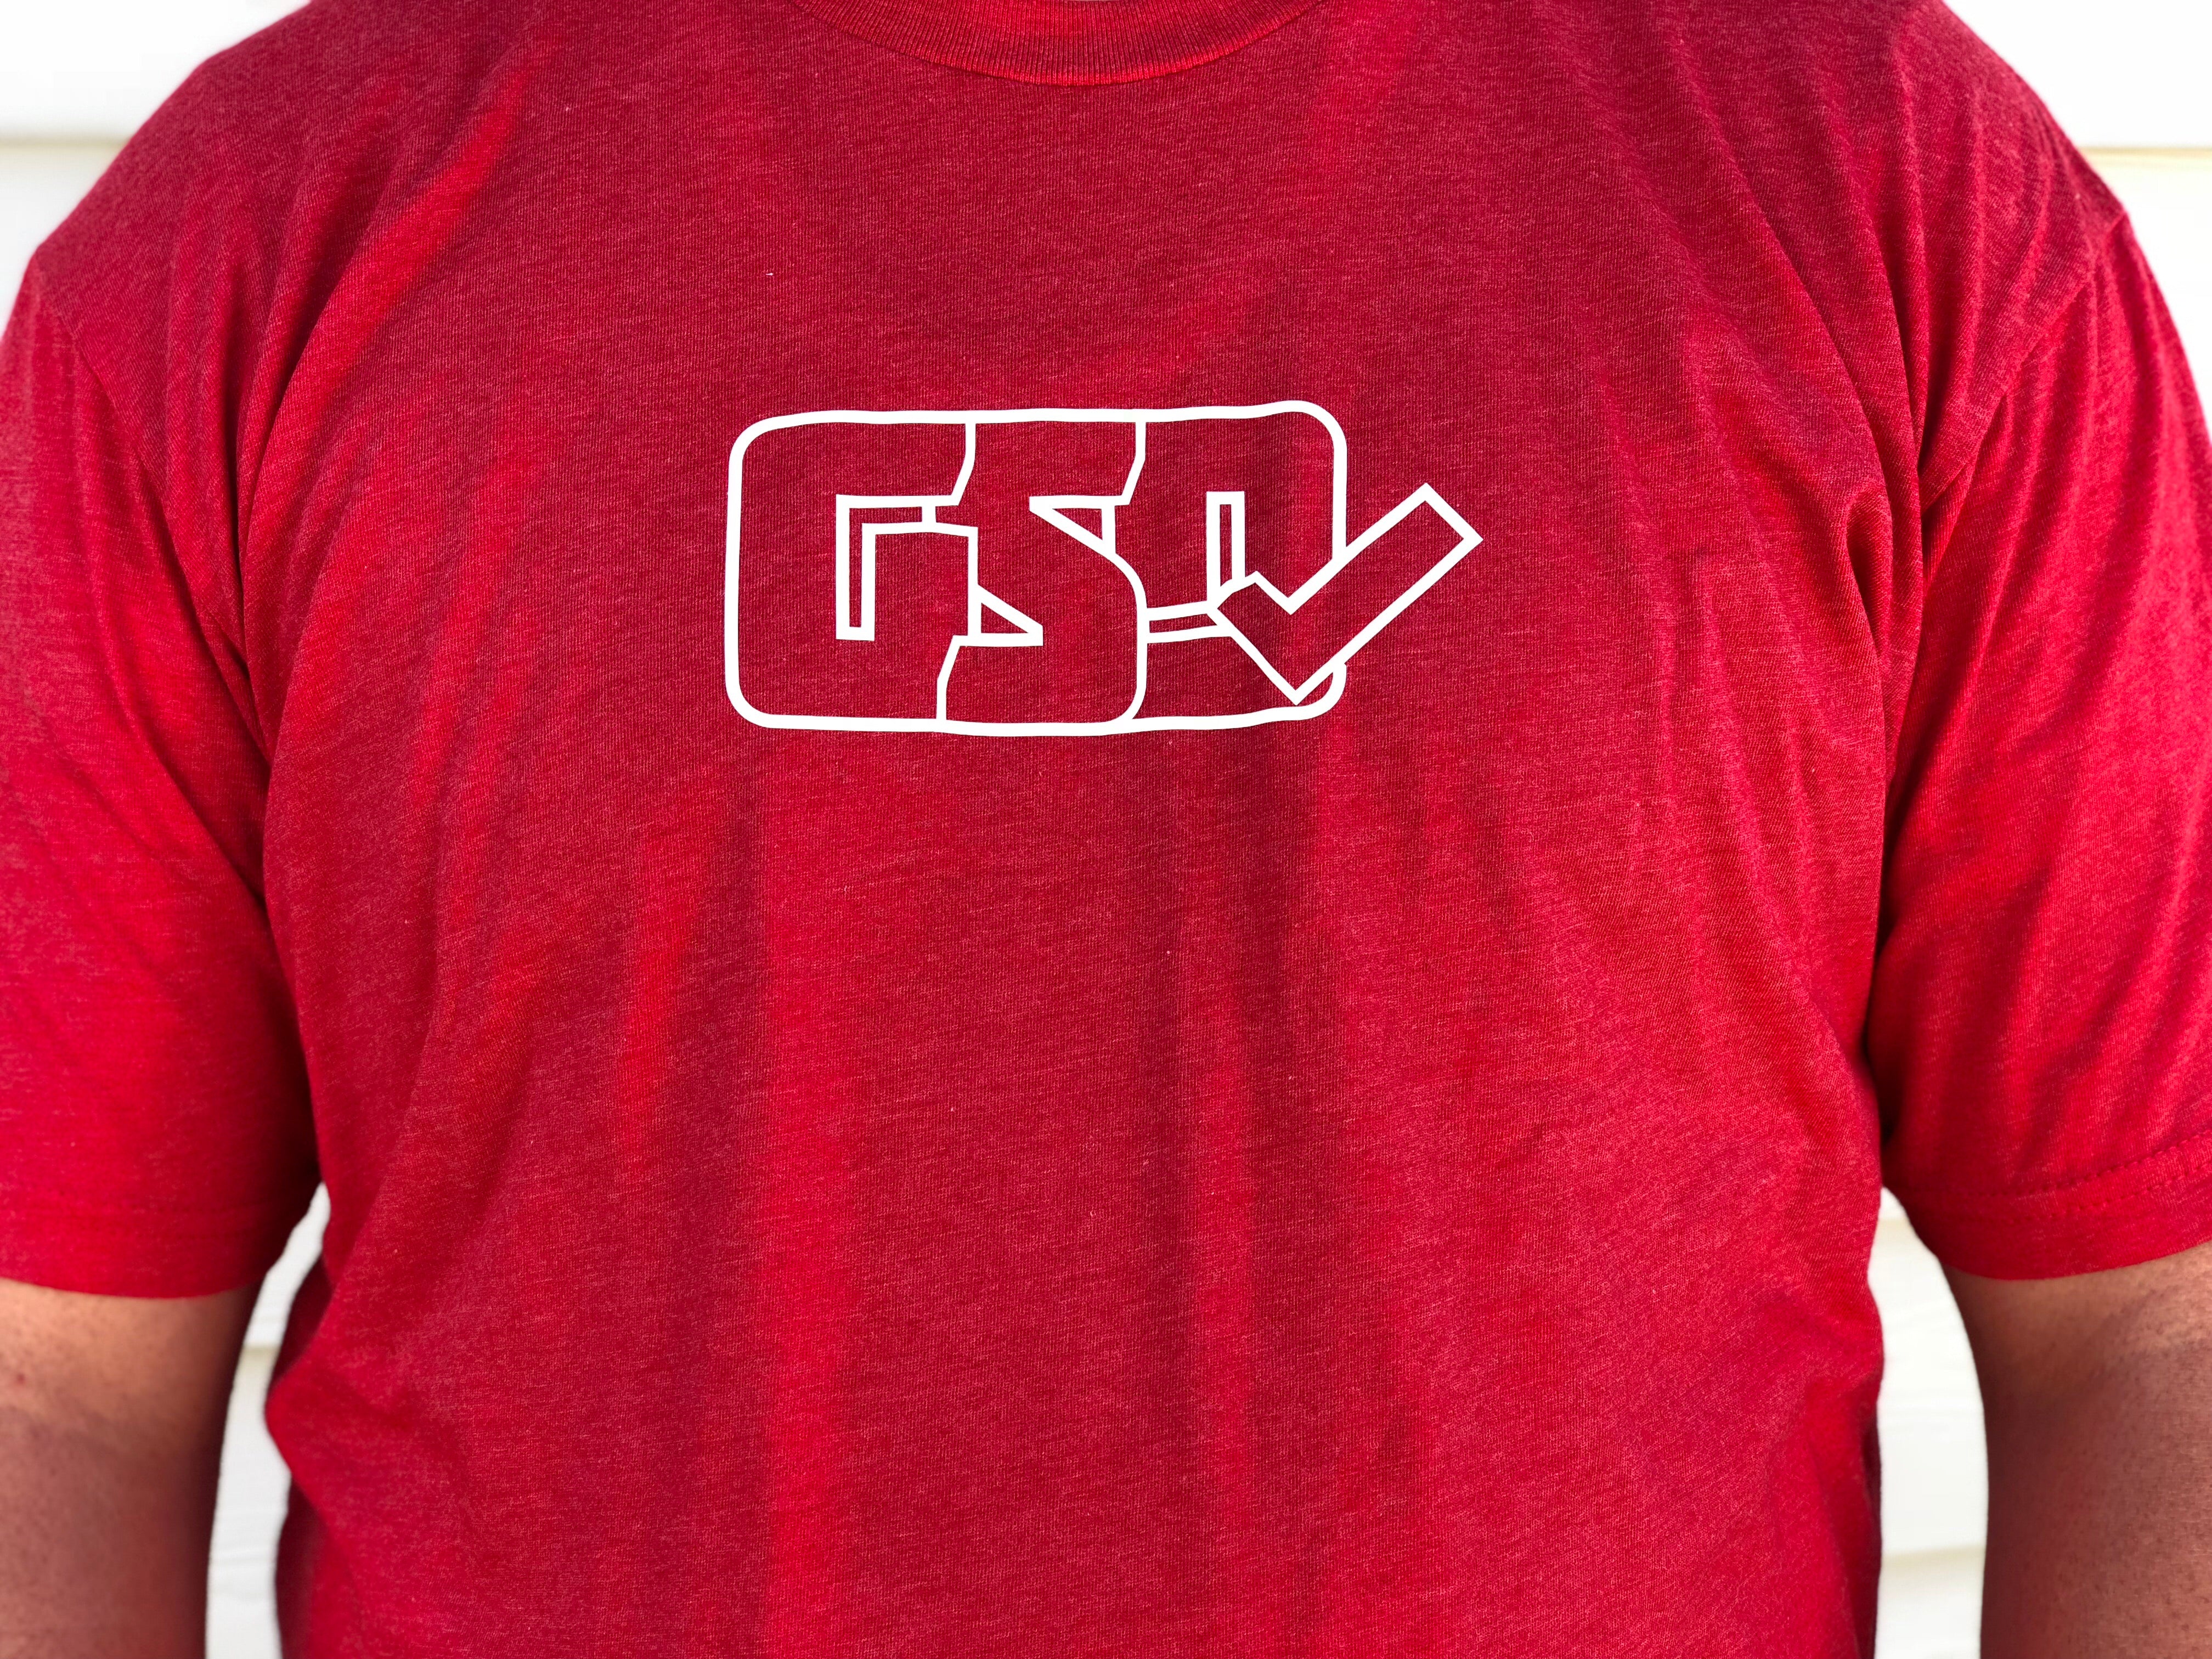 GSD OUTLINE T-Shirt - Red / White - “Pete Rose”